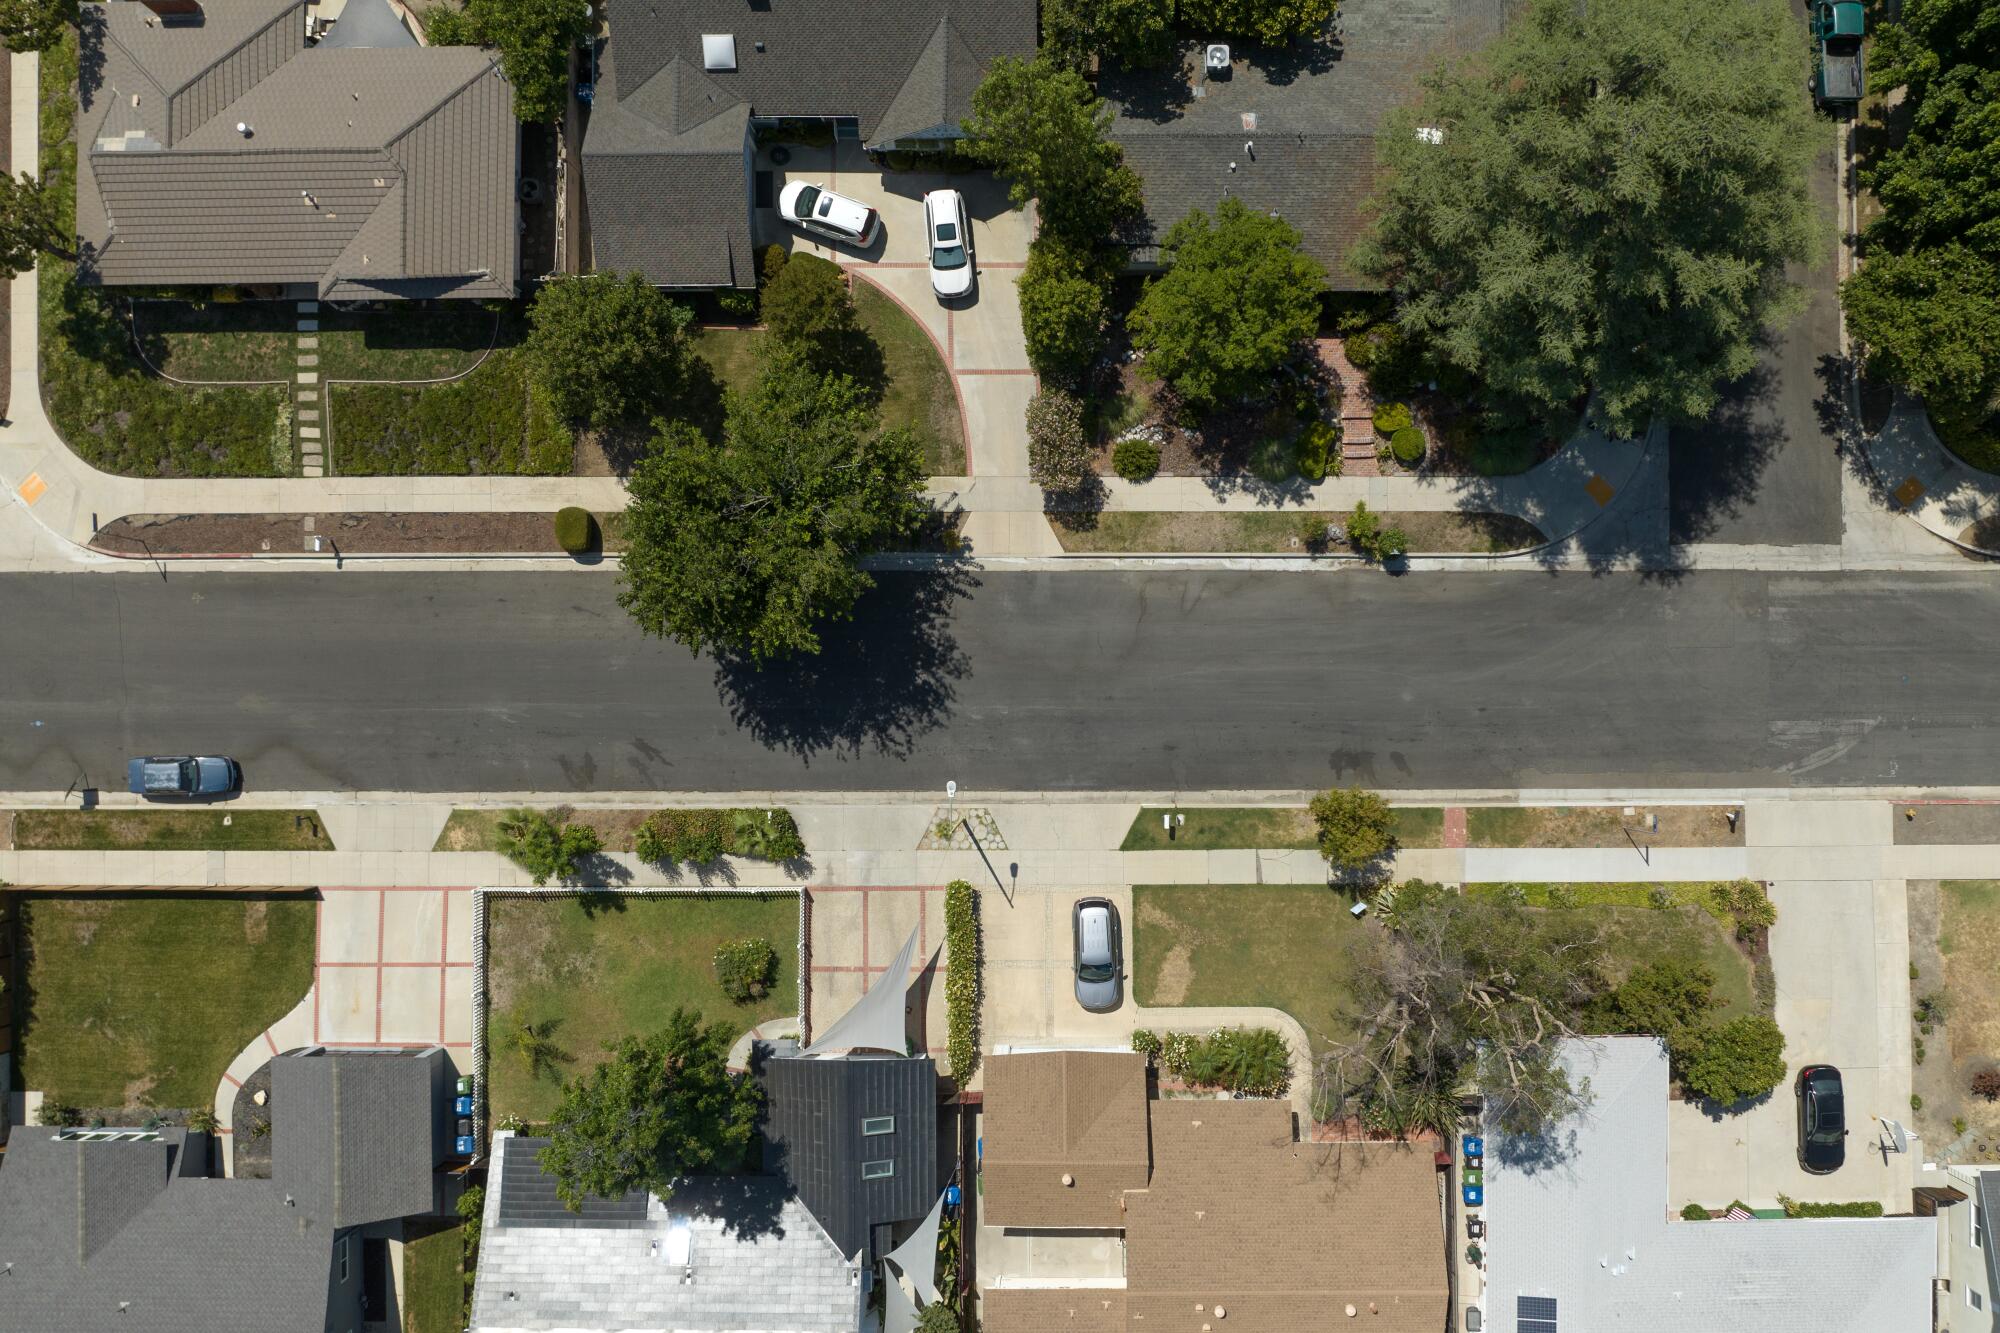 An aerial view of a residential street with green lawns